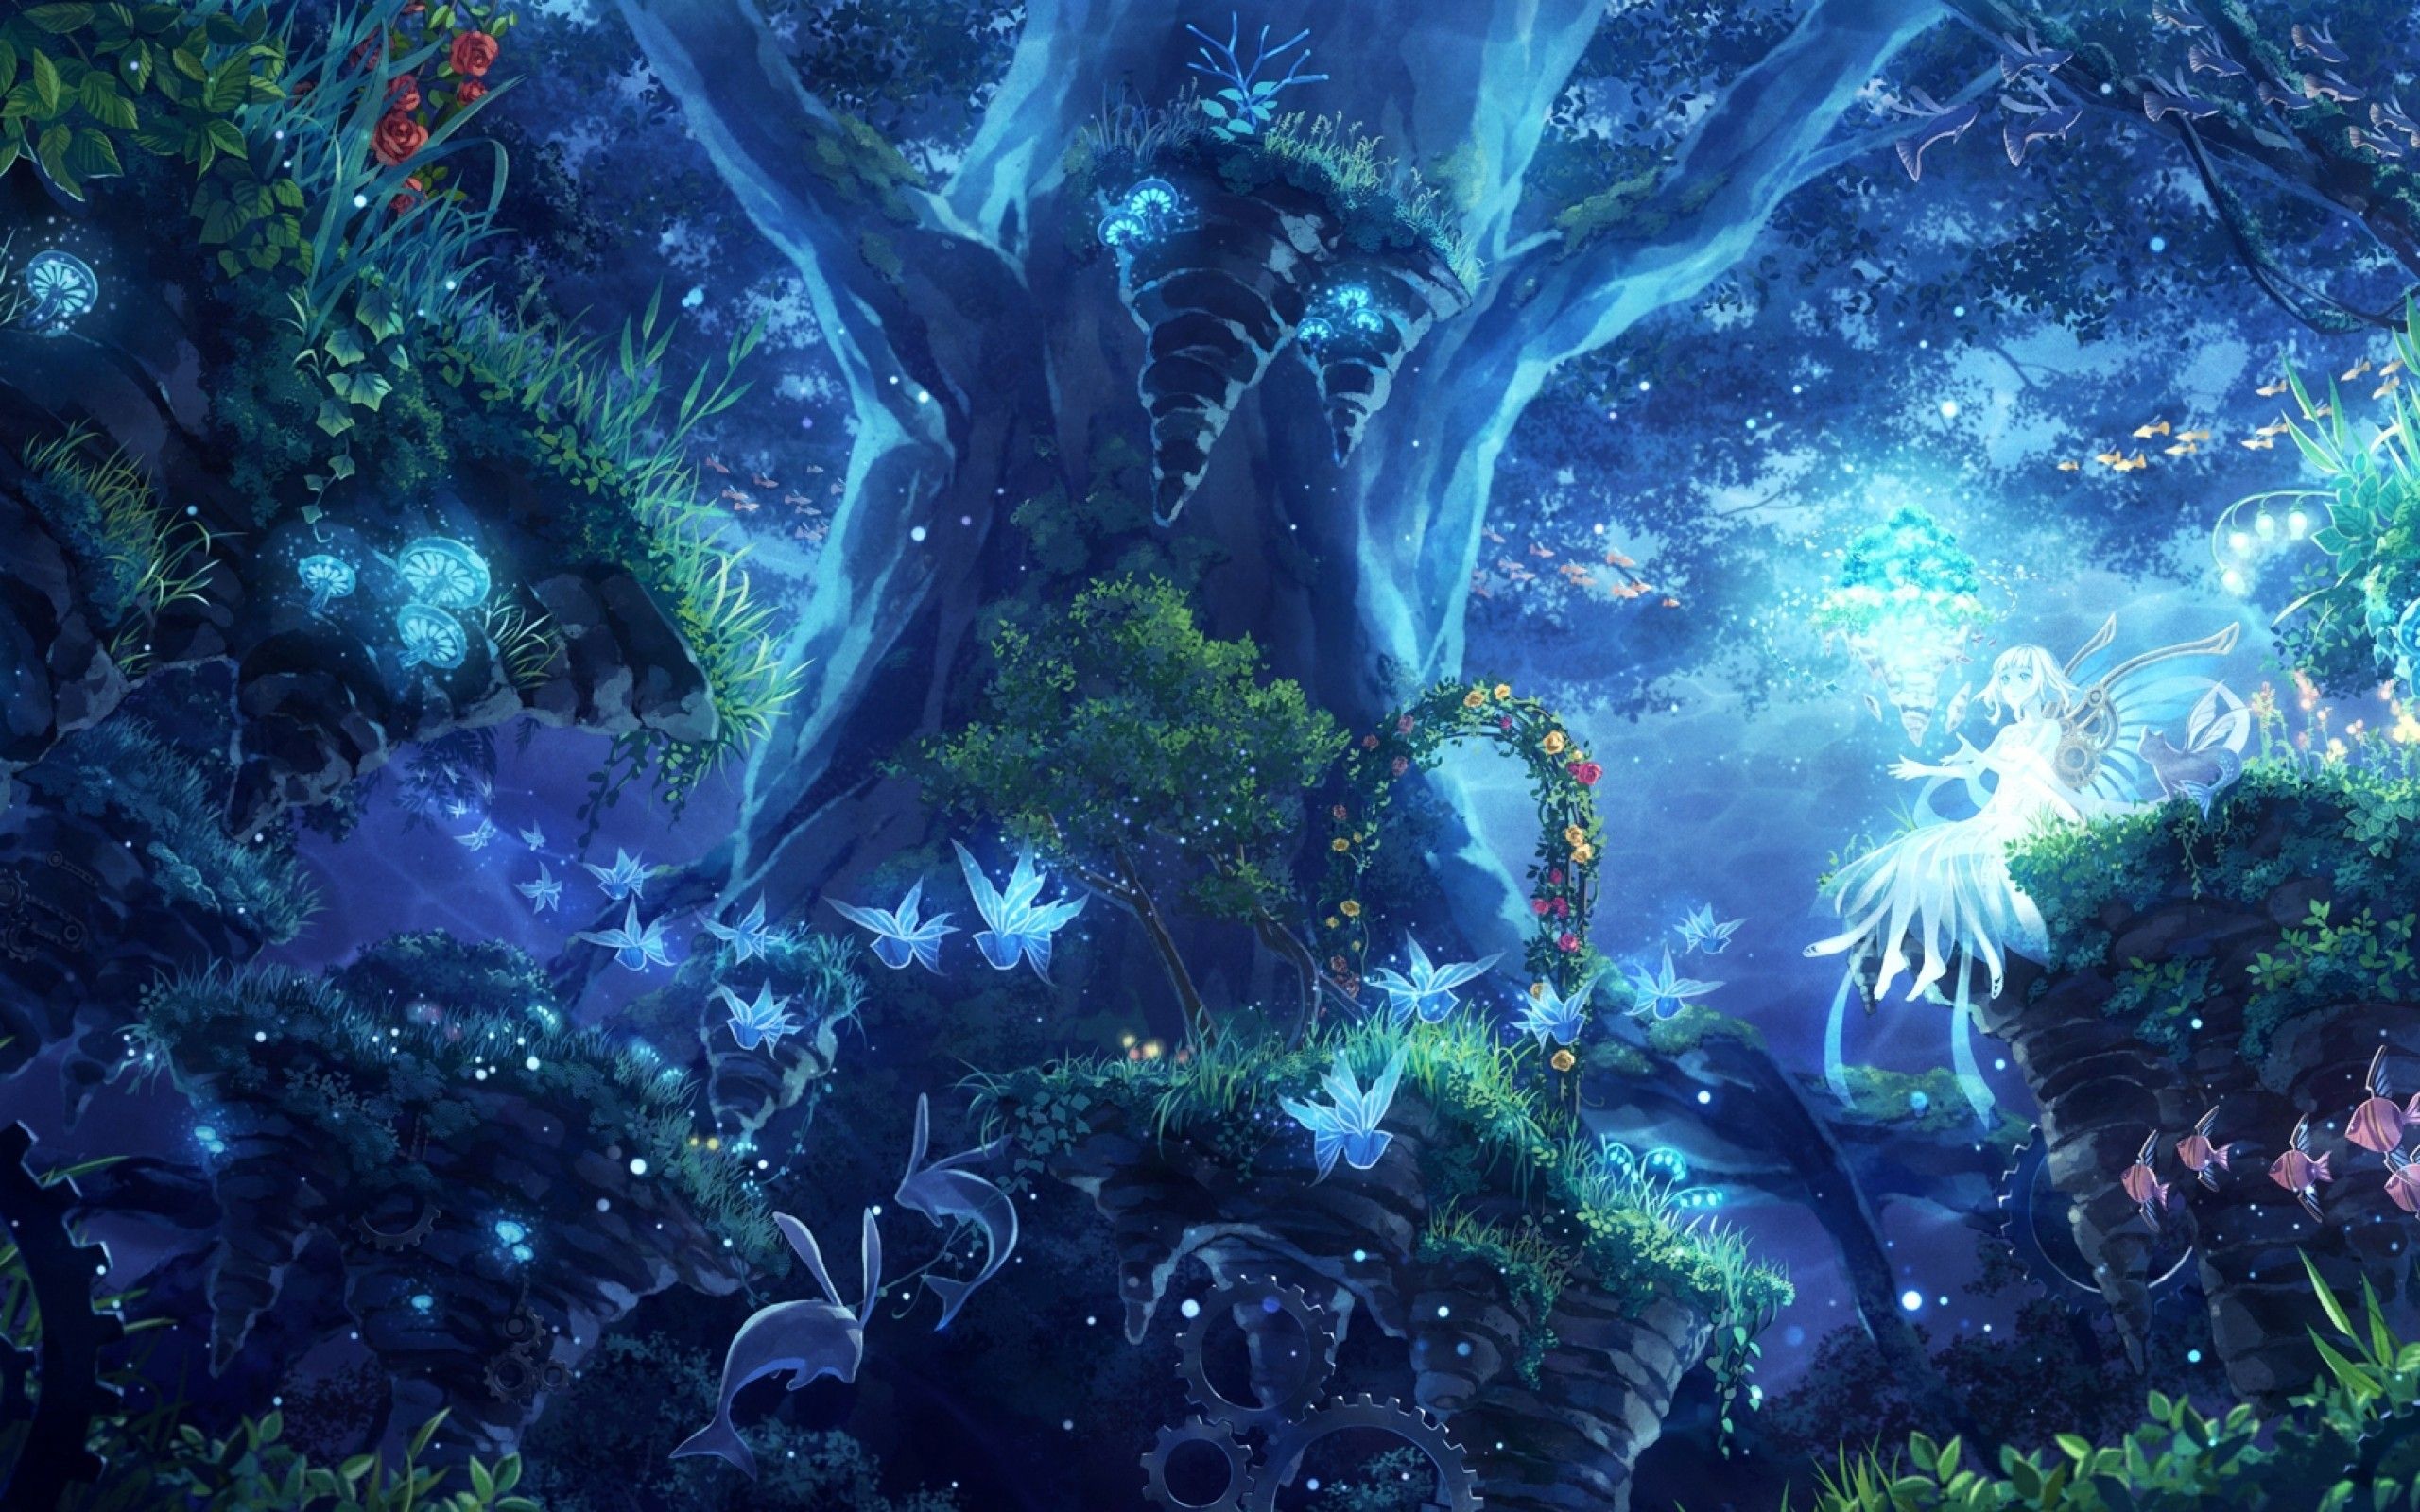 Download 2560x1600 Anime Girl, Fairy Forest, Butterflies, Plants.